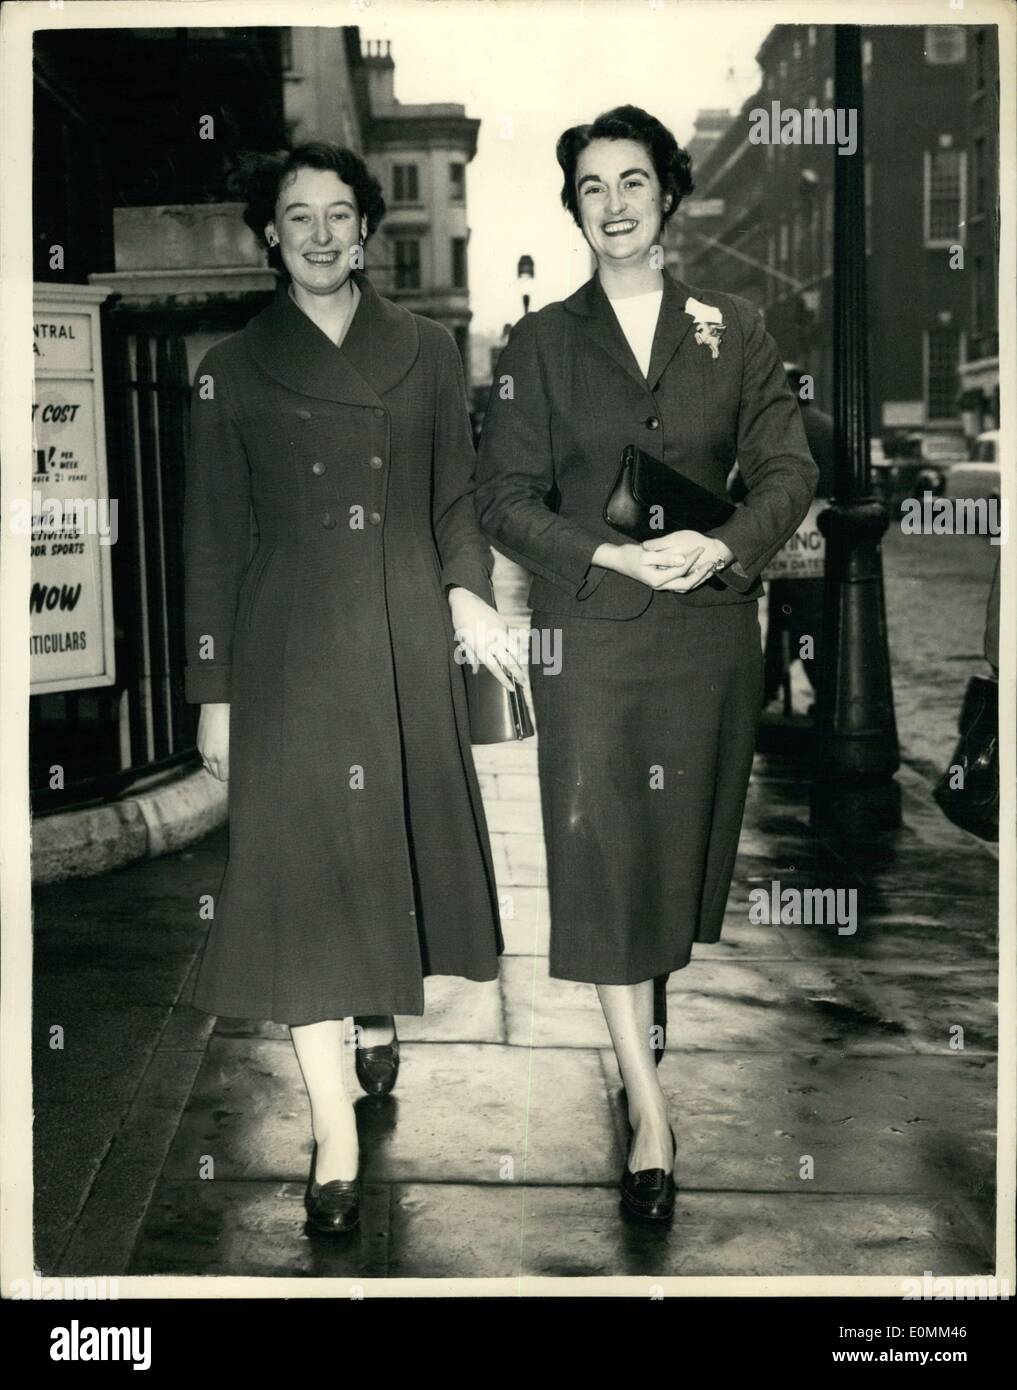 Nov. 11, 1955 - Two young London Policewomen prepare for three months tour for the gold coast and Nigeria. Two London Policewomen 23 year old Sheila Richards of Hillingdon, Middlesex and 23 year old Caroline Henthorn of Briggs, Lancs., were to be seen in London this morning. They are two members of a party of six men and morning Stock Photo